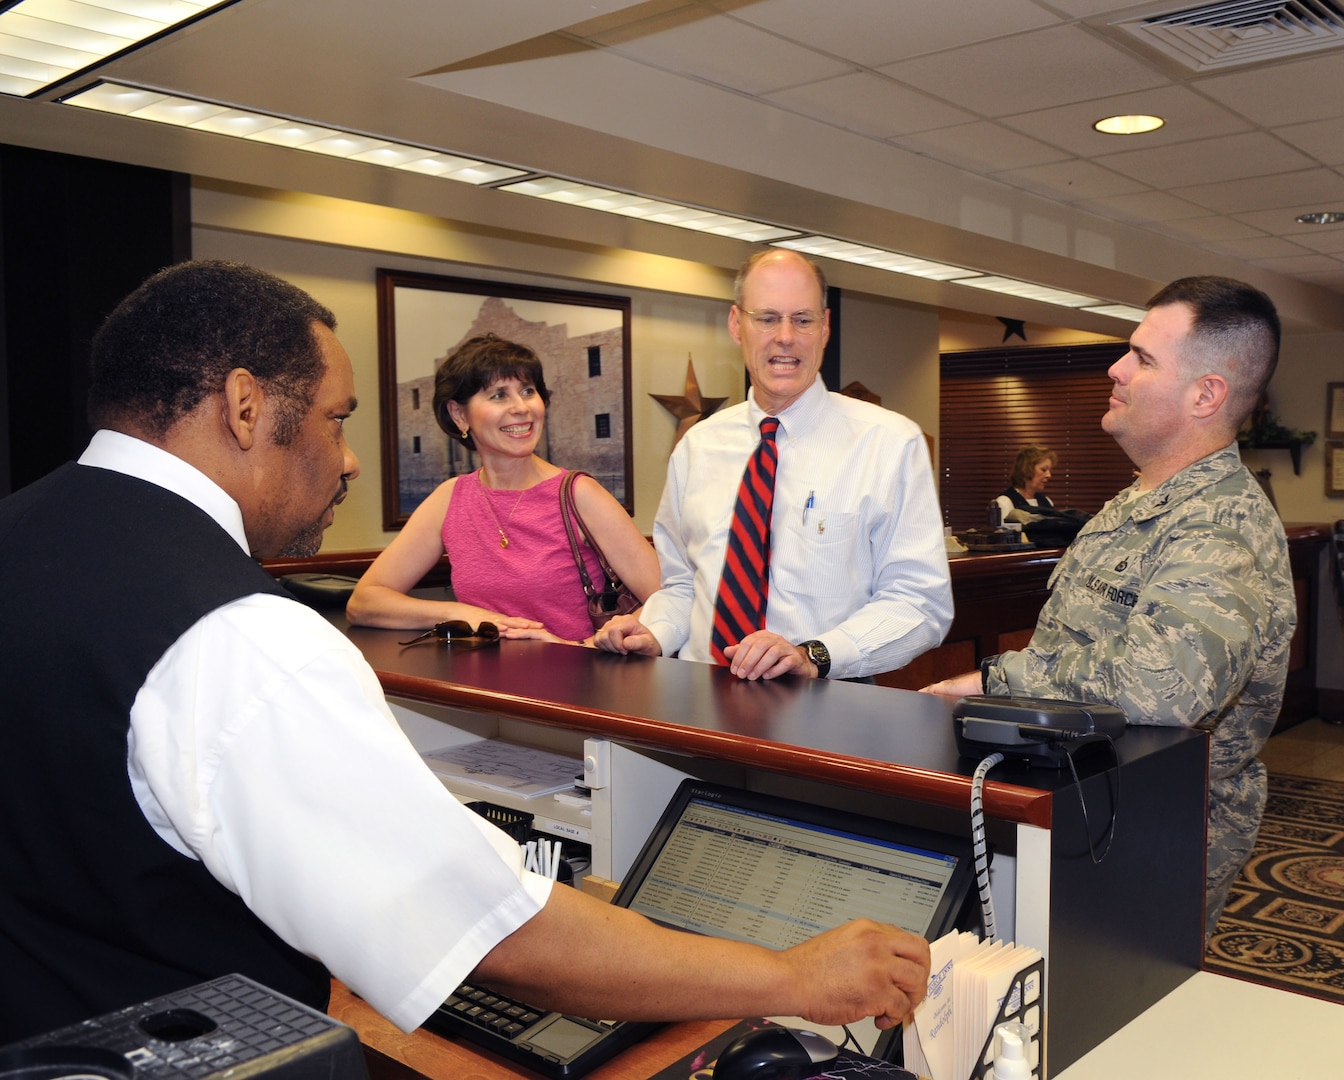 Samuel Brightman, Randolph Inn guest services representative, helps Mr. and Mrs. Jon Davis (center) of San Angelo, Texas, and Col. Scott Bethel, Air Education and Training Command, at the front desk of the Randolph Air Force Base, Texas, lodging facility. The Randolph Inn lodging team was awarded the AETC 2009 Air Force Innkeeper Award recently and will now compete at the Air Force level. (U.S. Air Force photo by Rich McFadden)